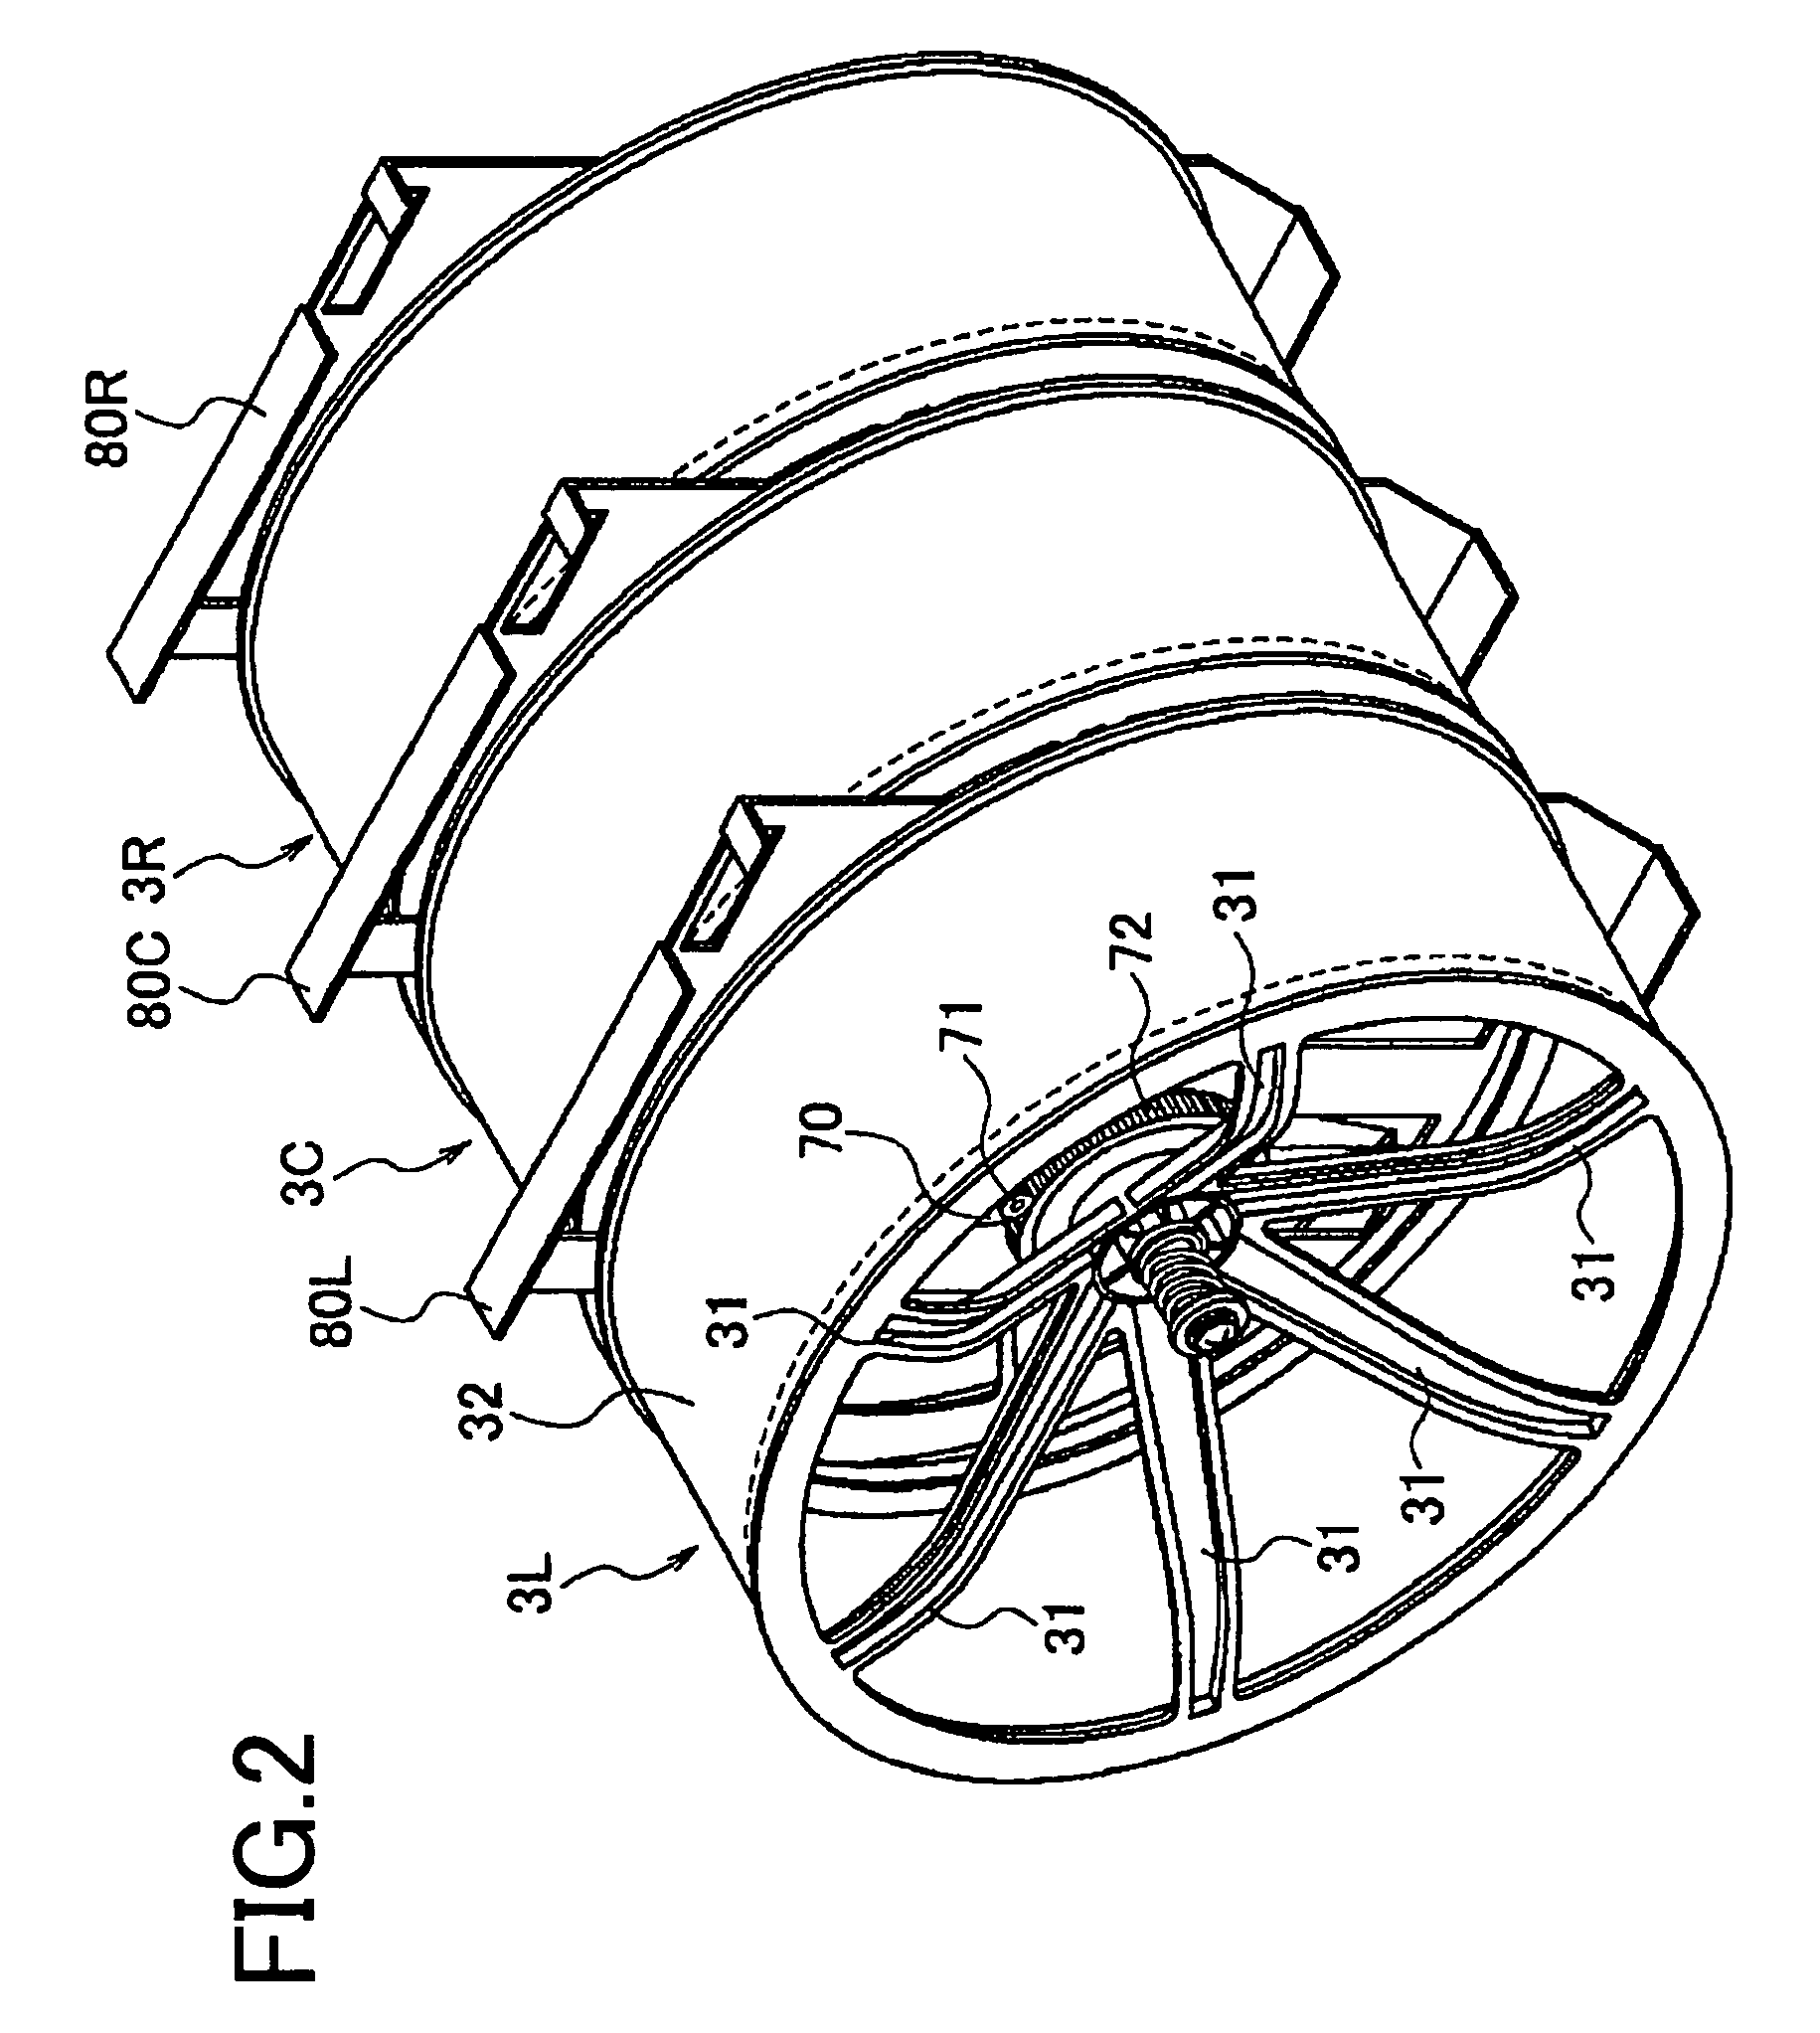 Motor stop control device utilizable for reel-type gaming machine